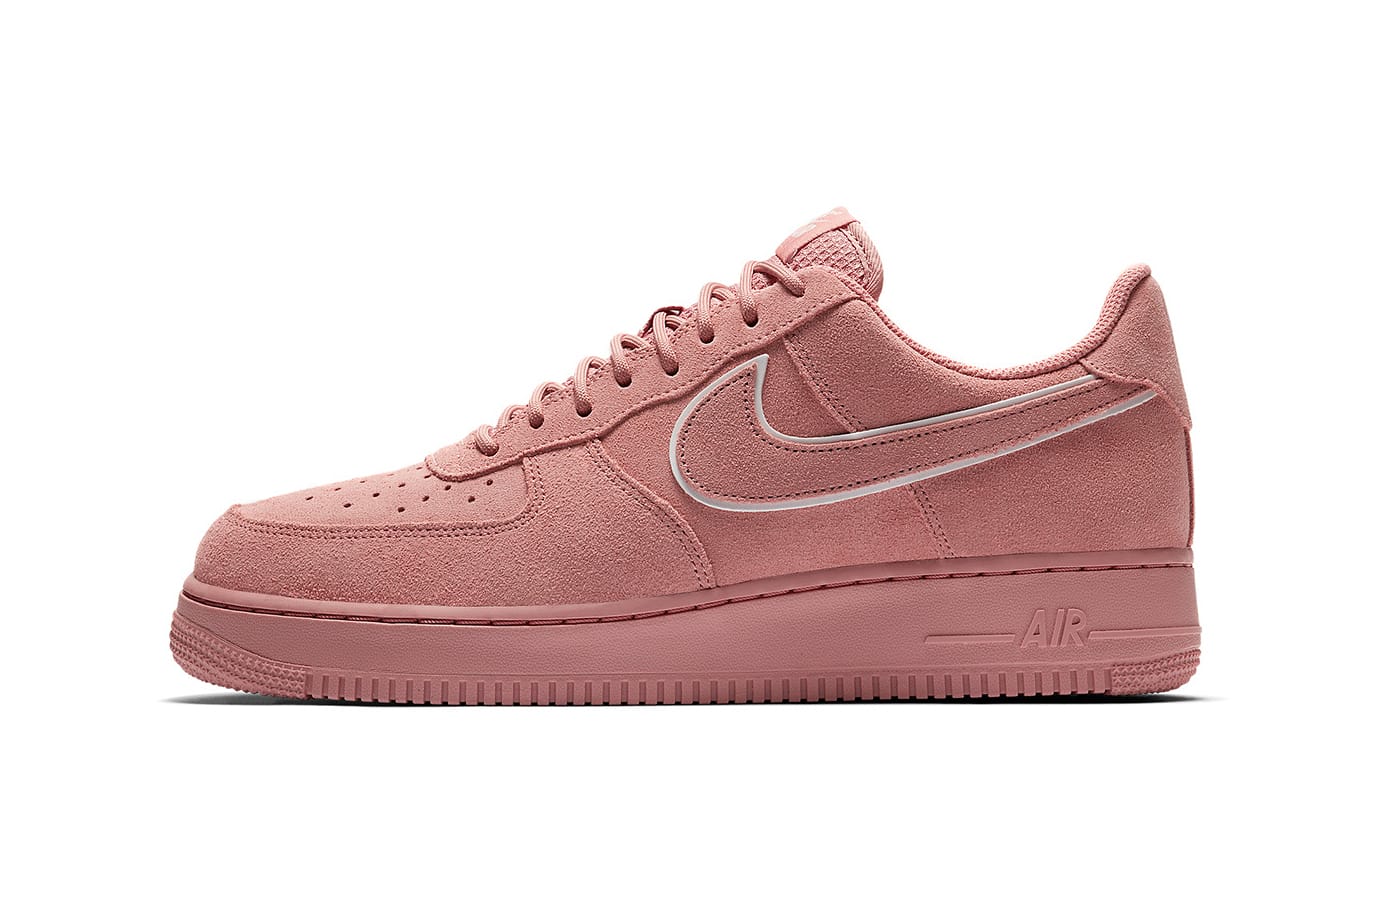 Nike Unveils Air Force 1 Low Suede Pack 